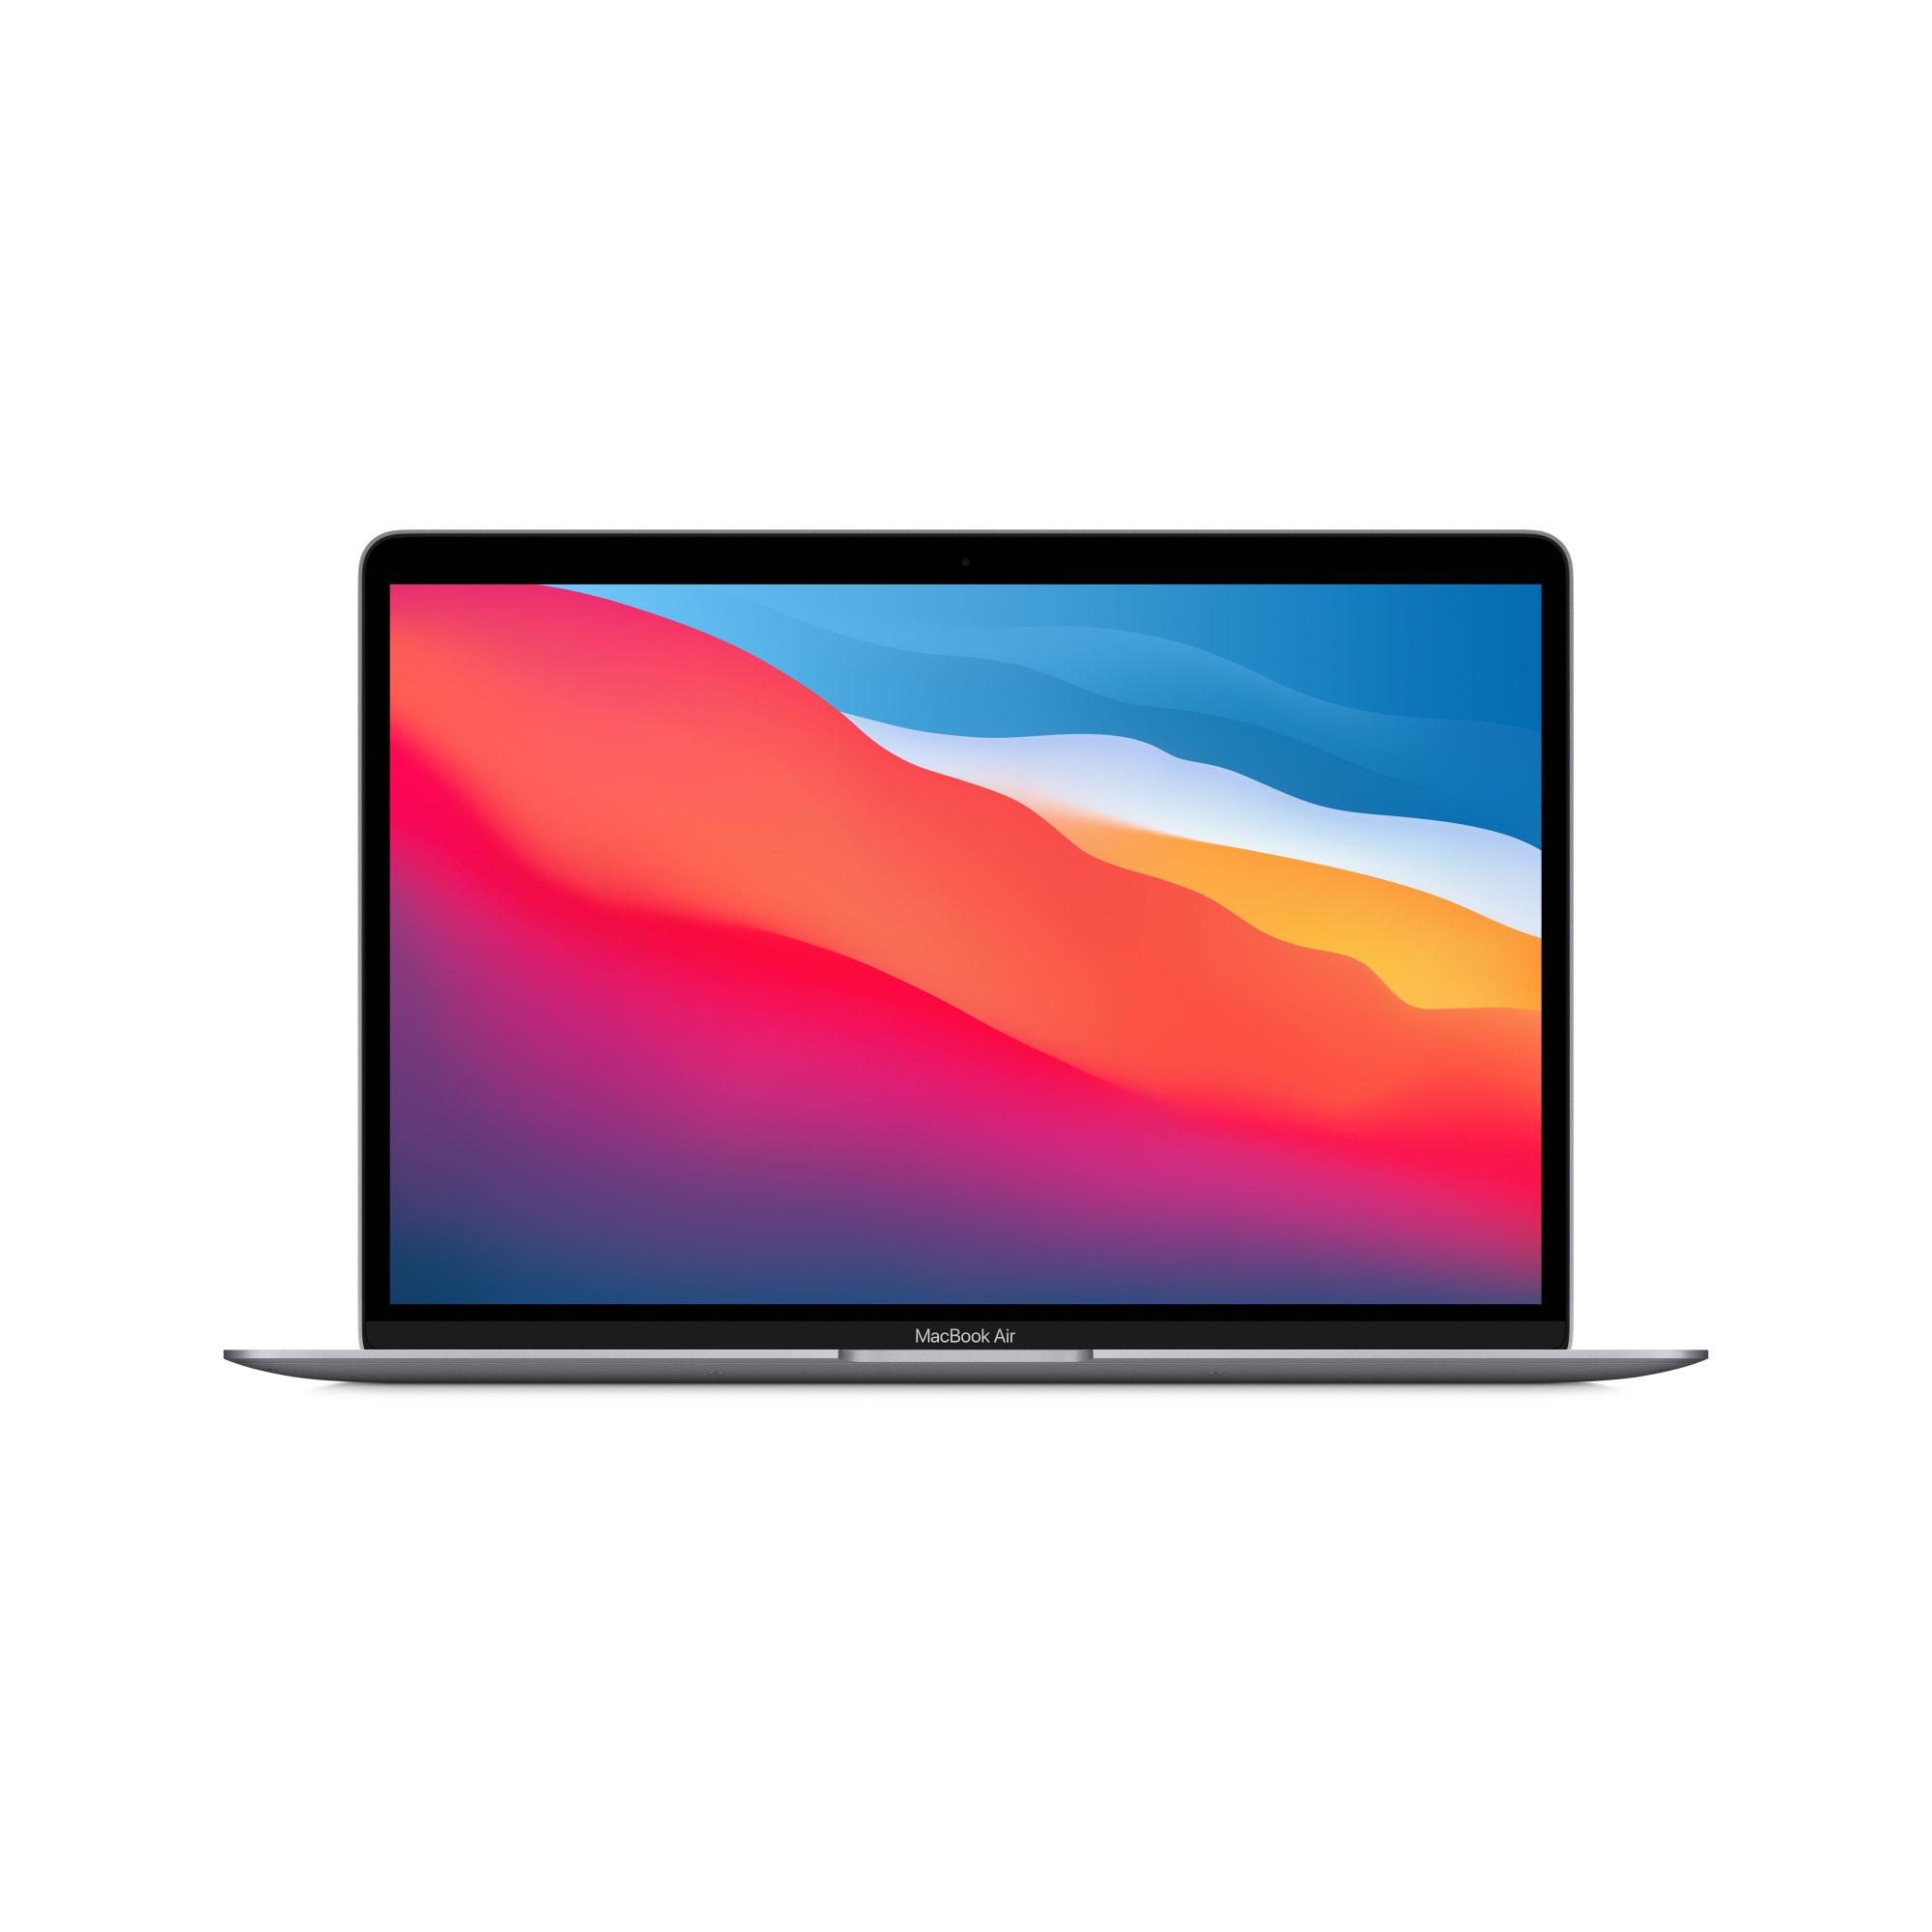 APPLE 13-inch MacBook Air: Apple M1 chip with 8-core CPU and 7-core GPU, 256GB - Space Grey